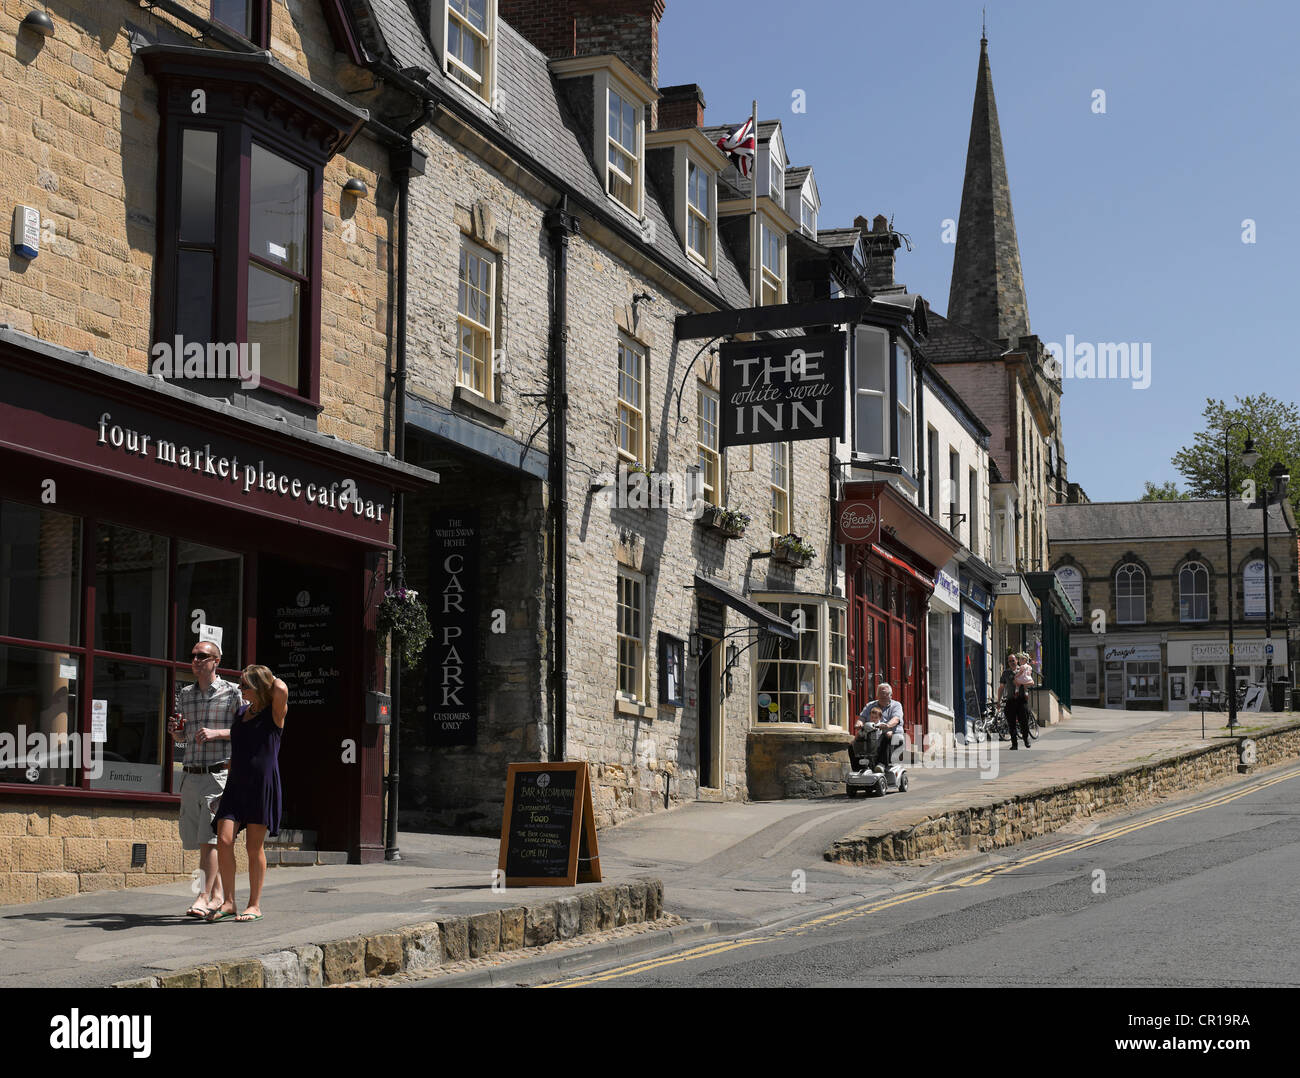 People walking in the town centre in summer Market Place Pickering North Yorkshire England UK United Kingdom GB Great Britain Stock Photo